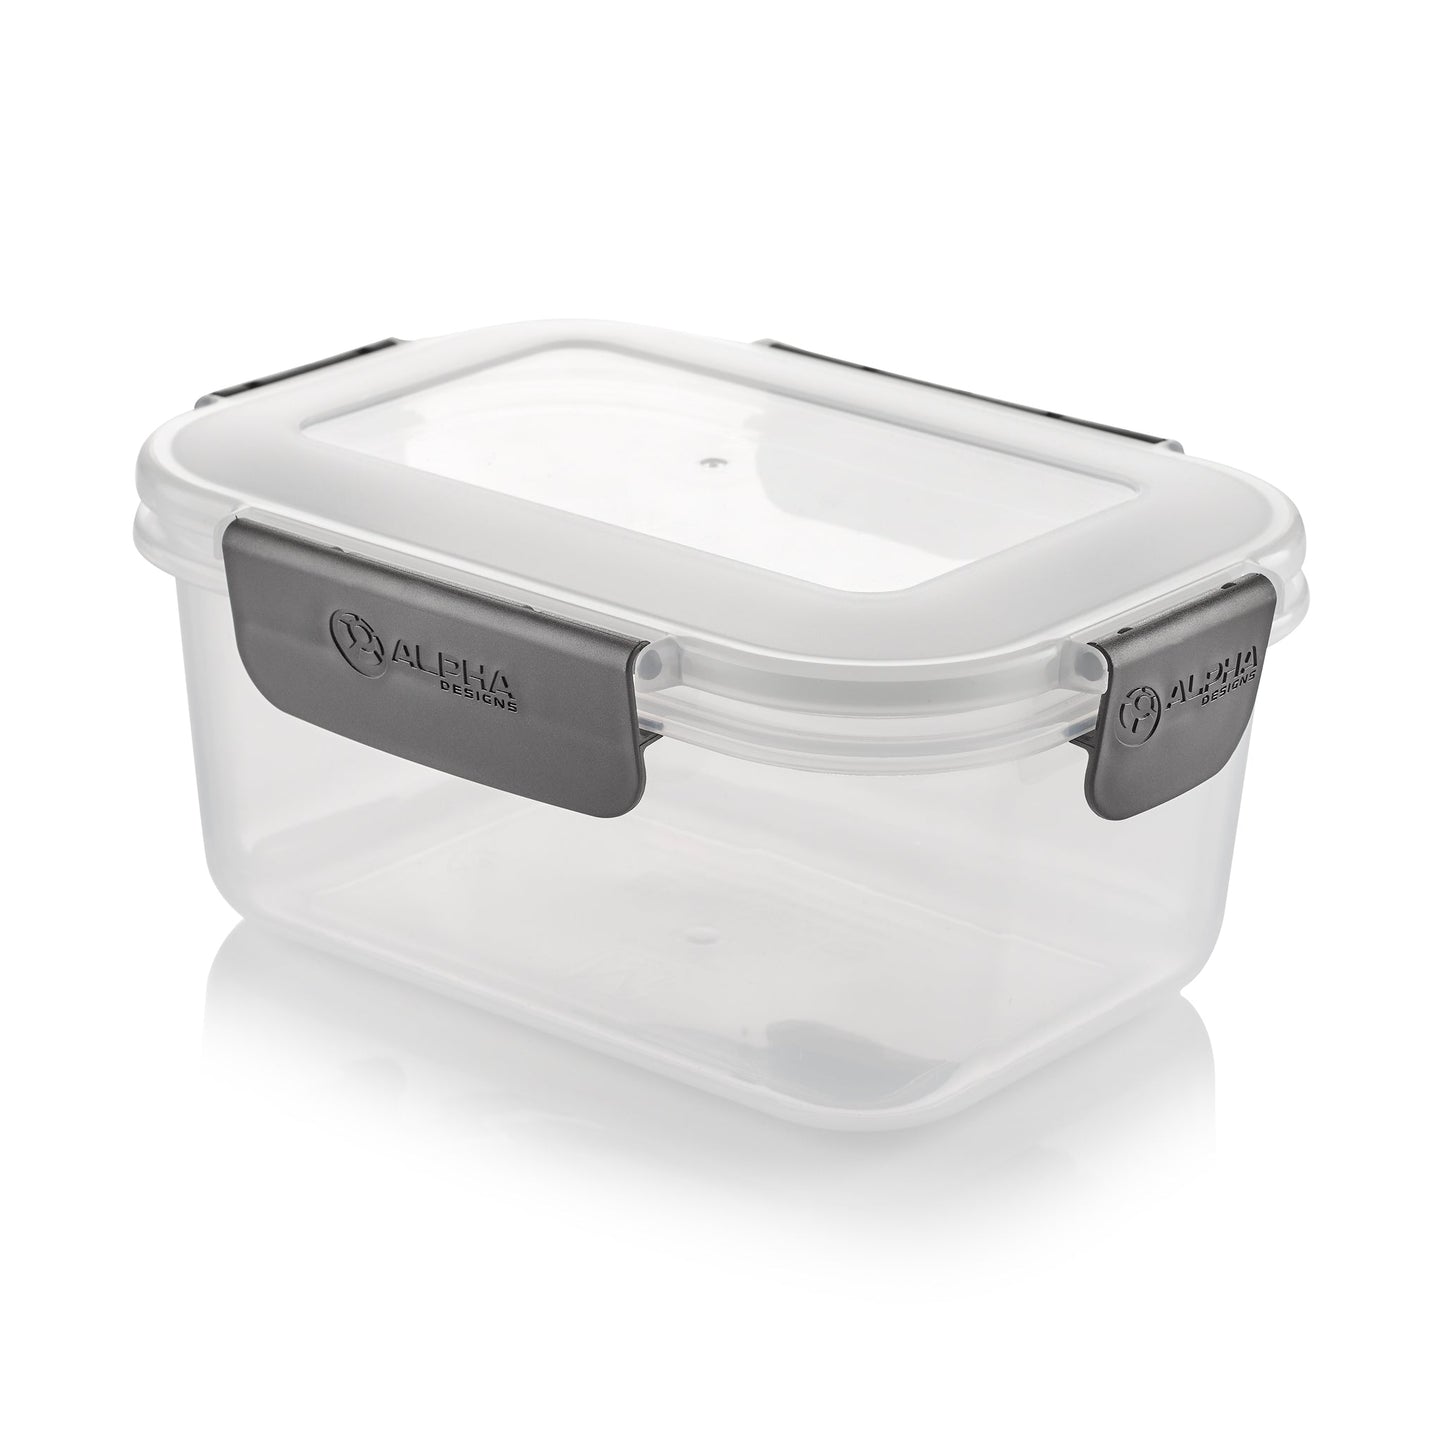 ALPHA DESIGNS MEAL SYSTEM - FULLY LOADED